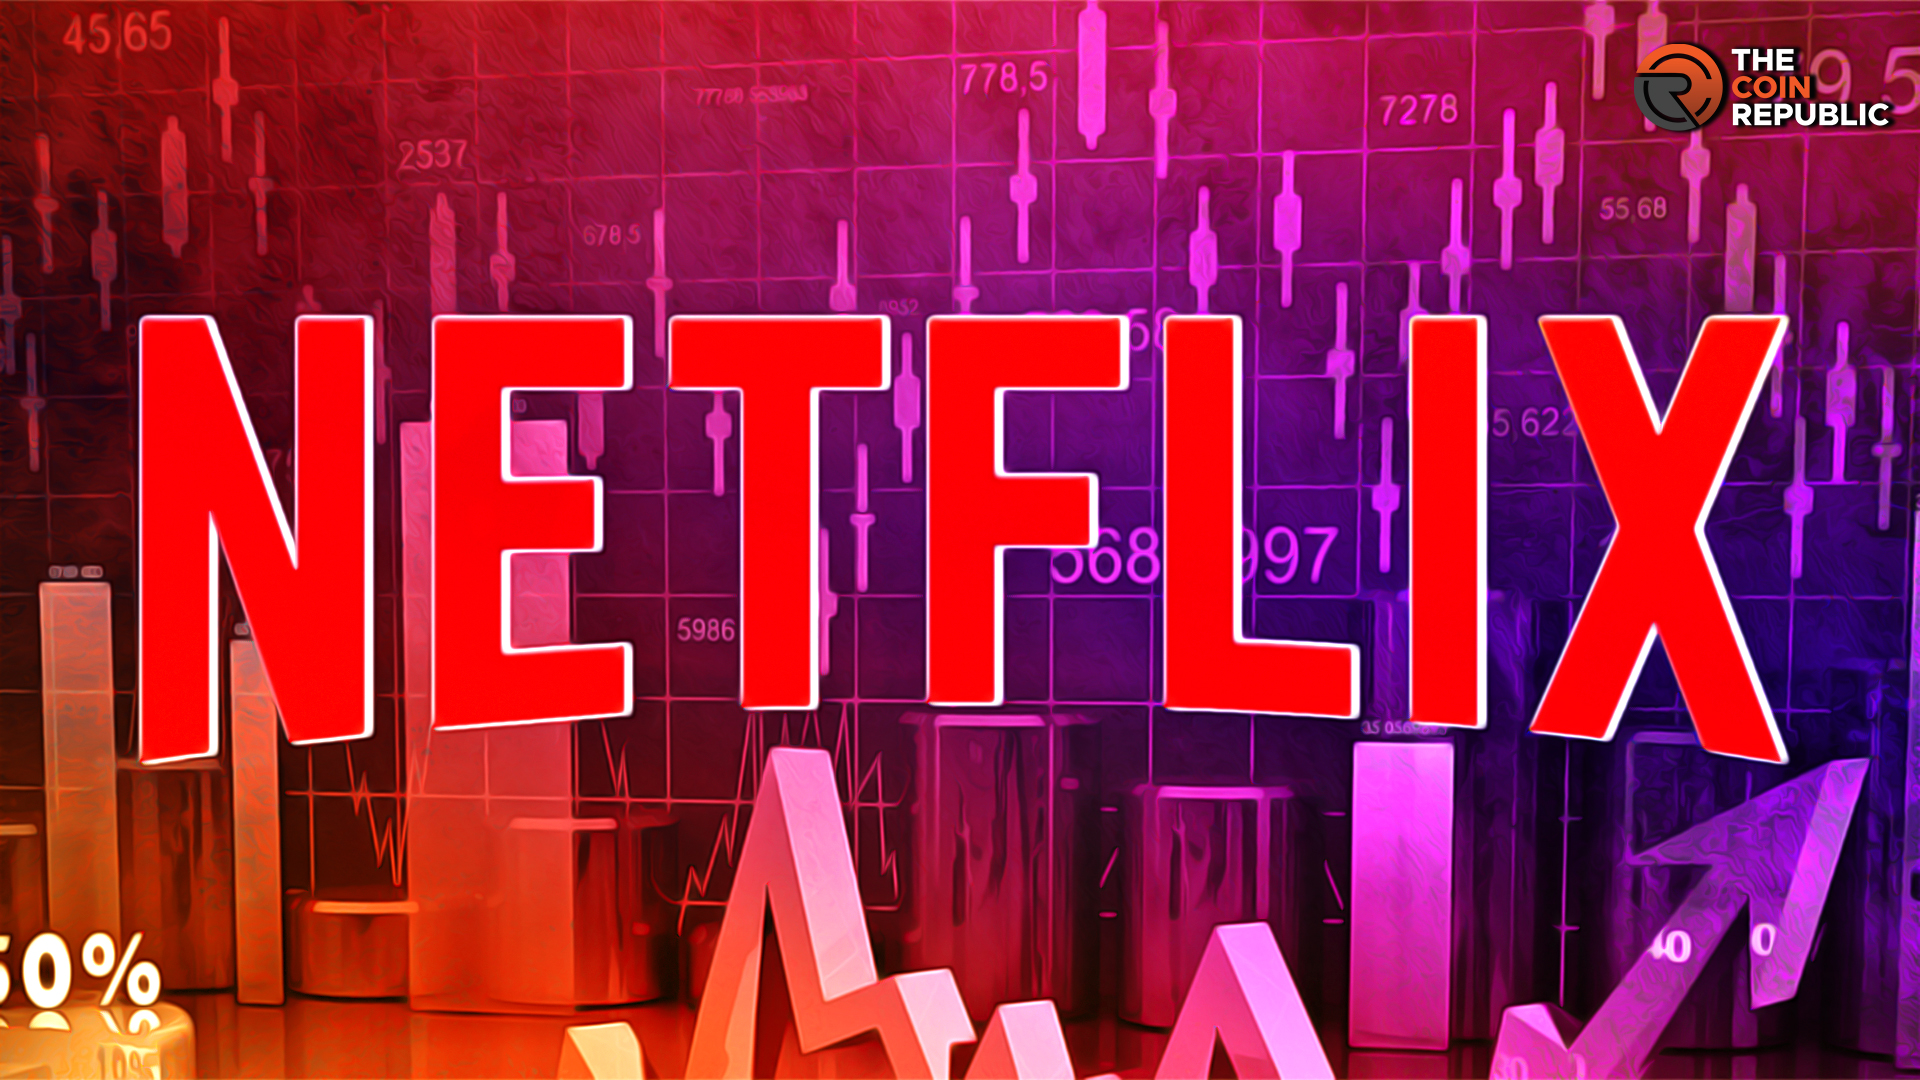 Netflix Stock Loses Before Earnings: Outlook For Post Earnings?